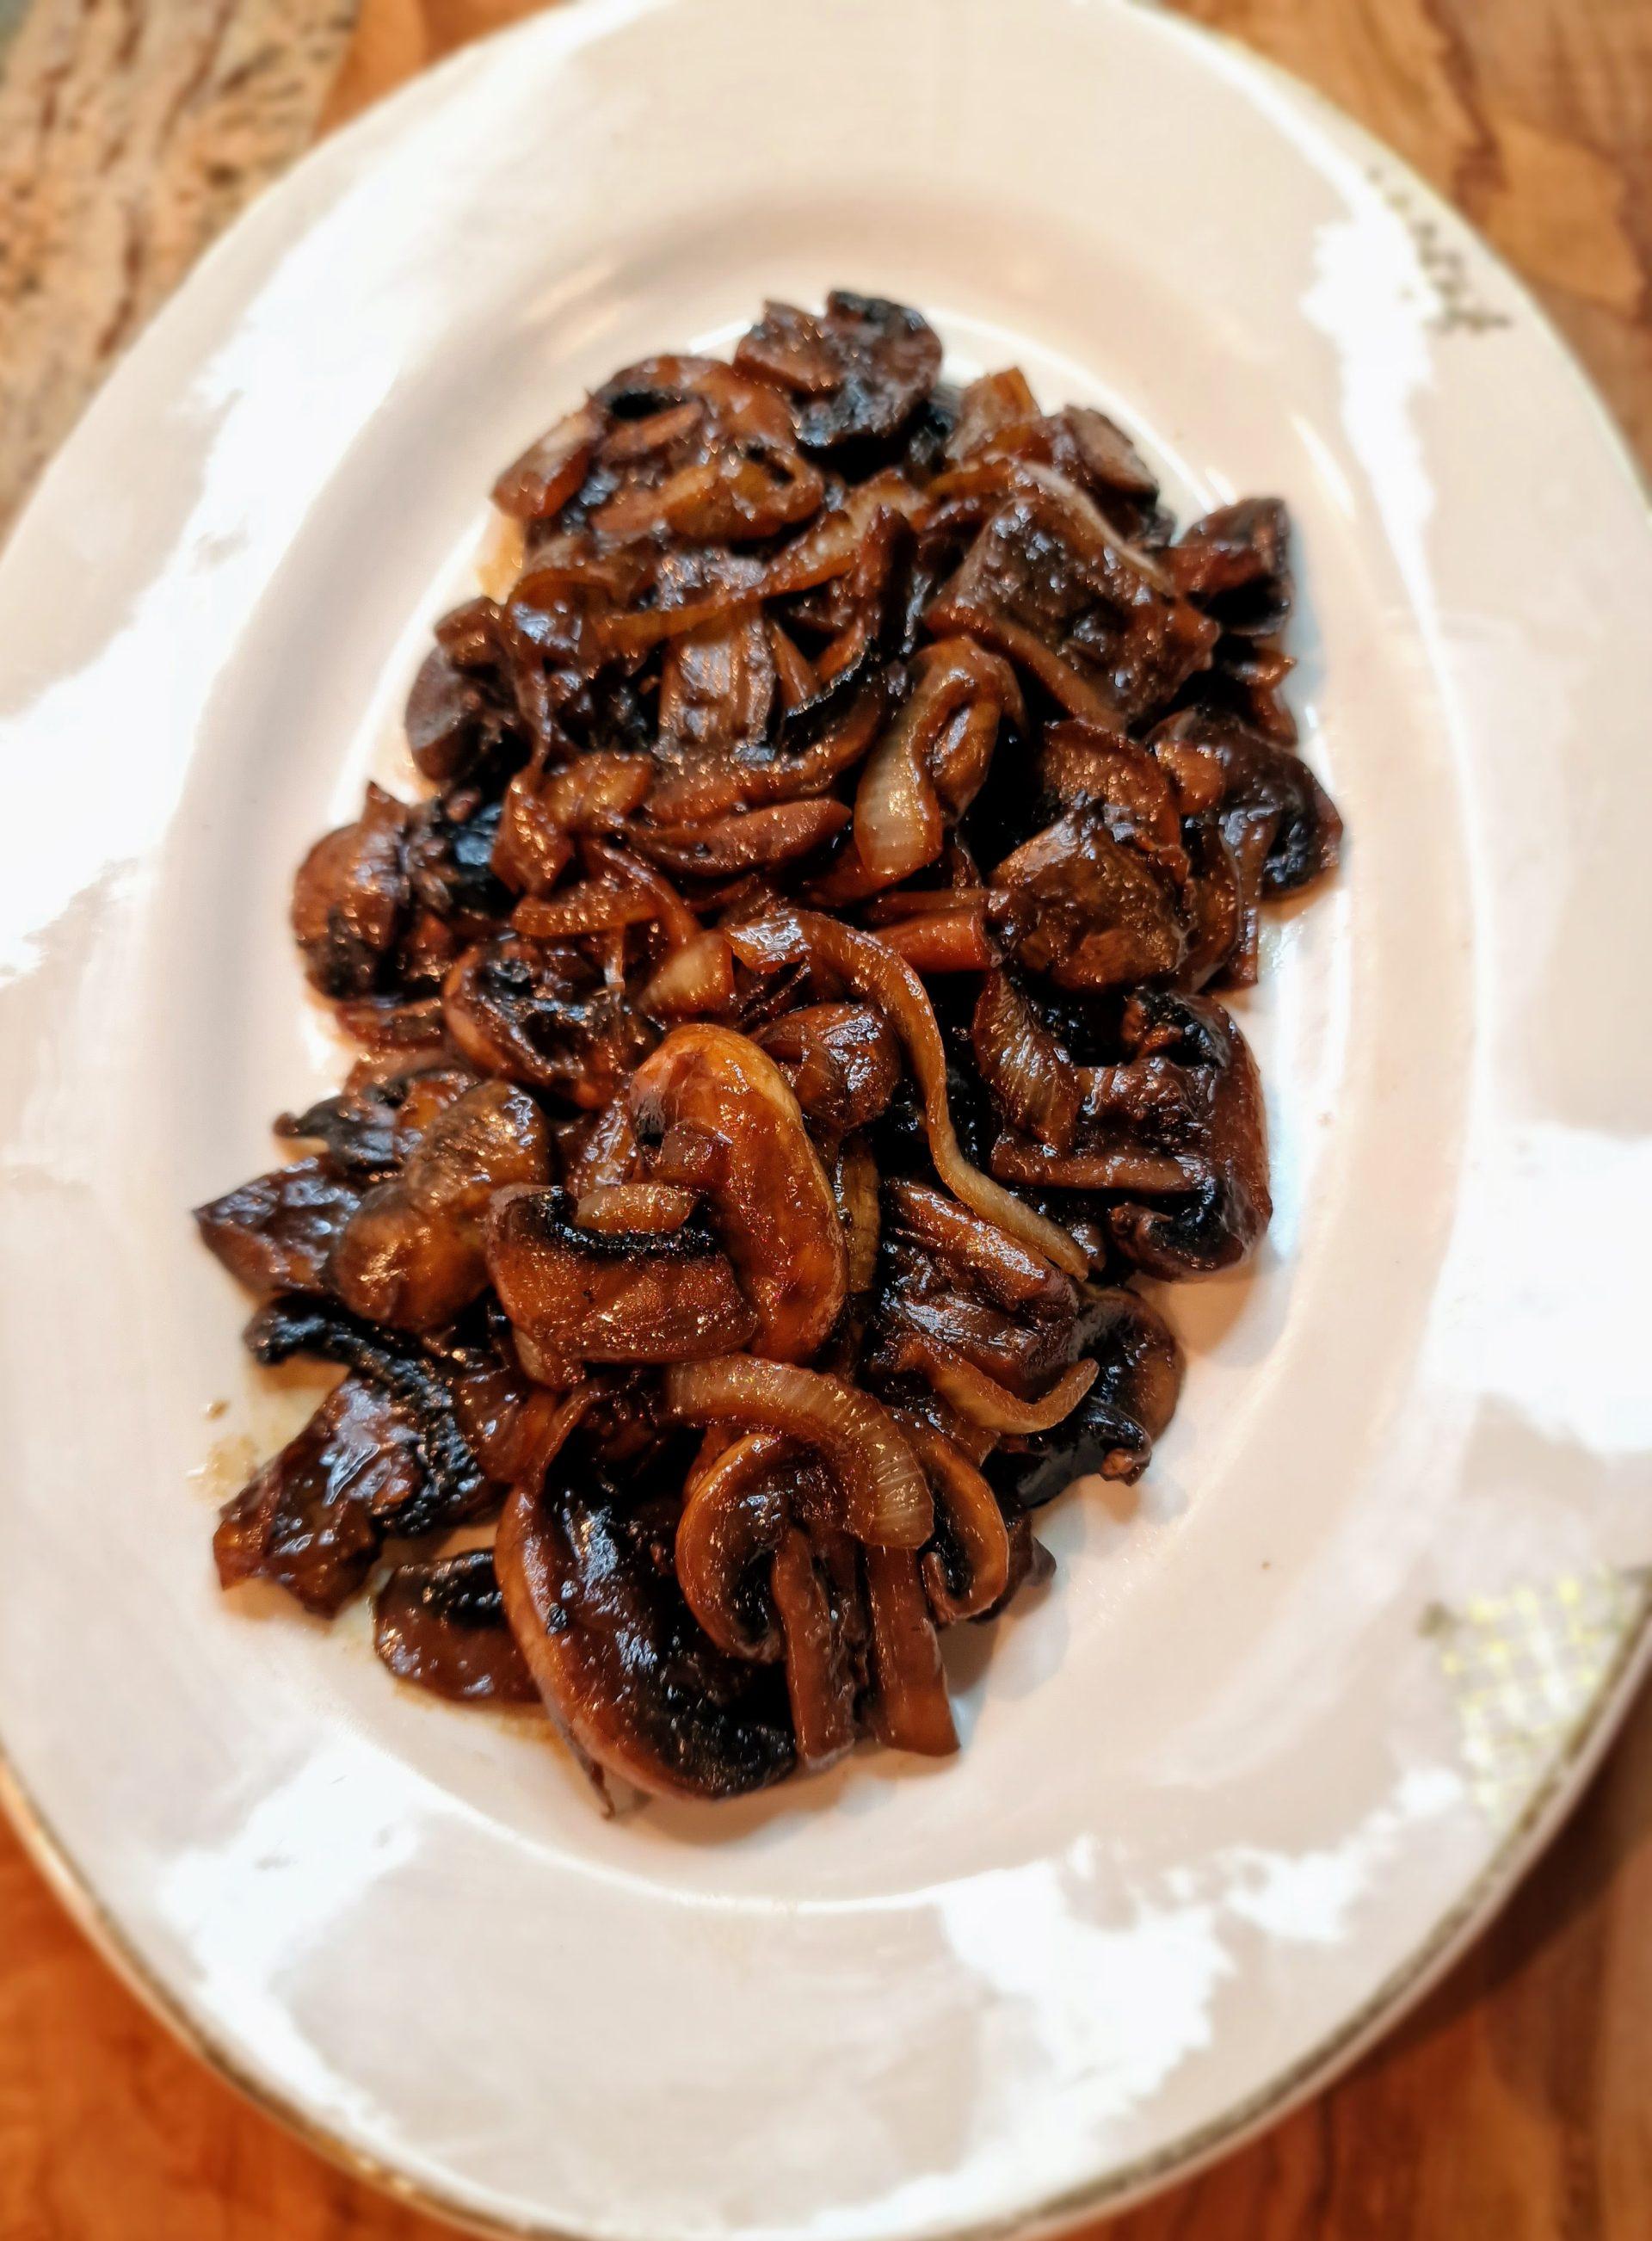 Savory Elegance on Your Plate: A Delectable Miso Glazed Mushrooms Recipe